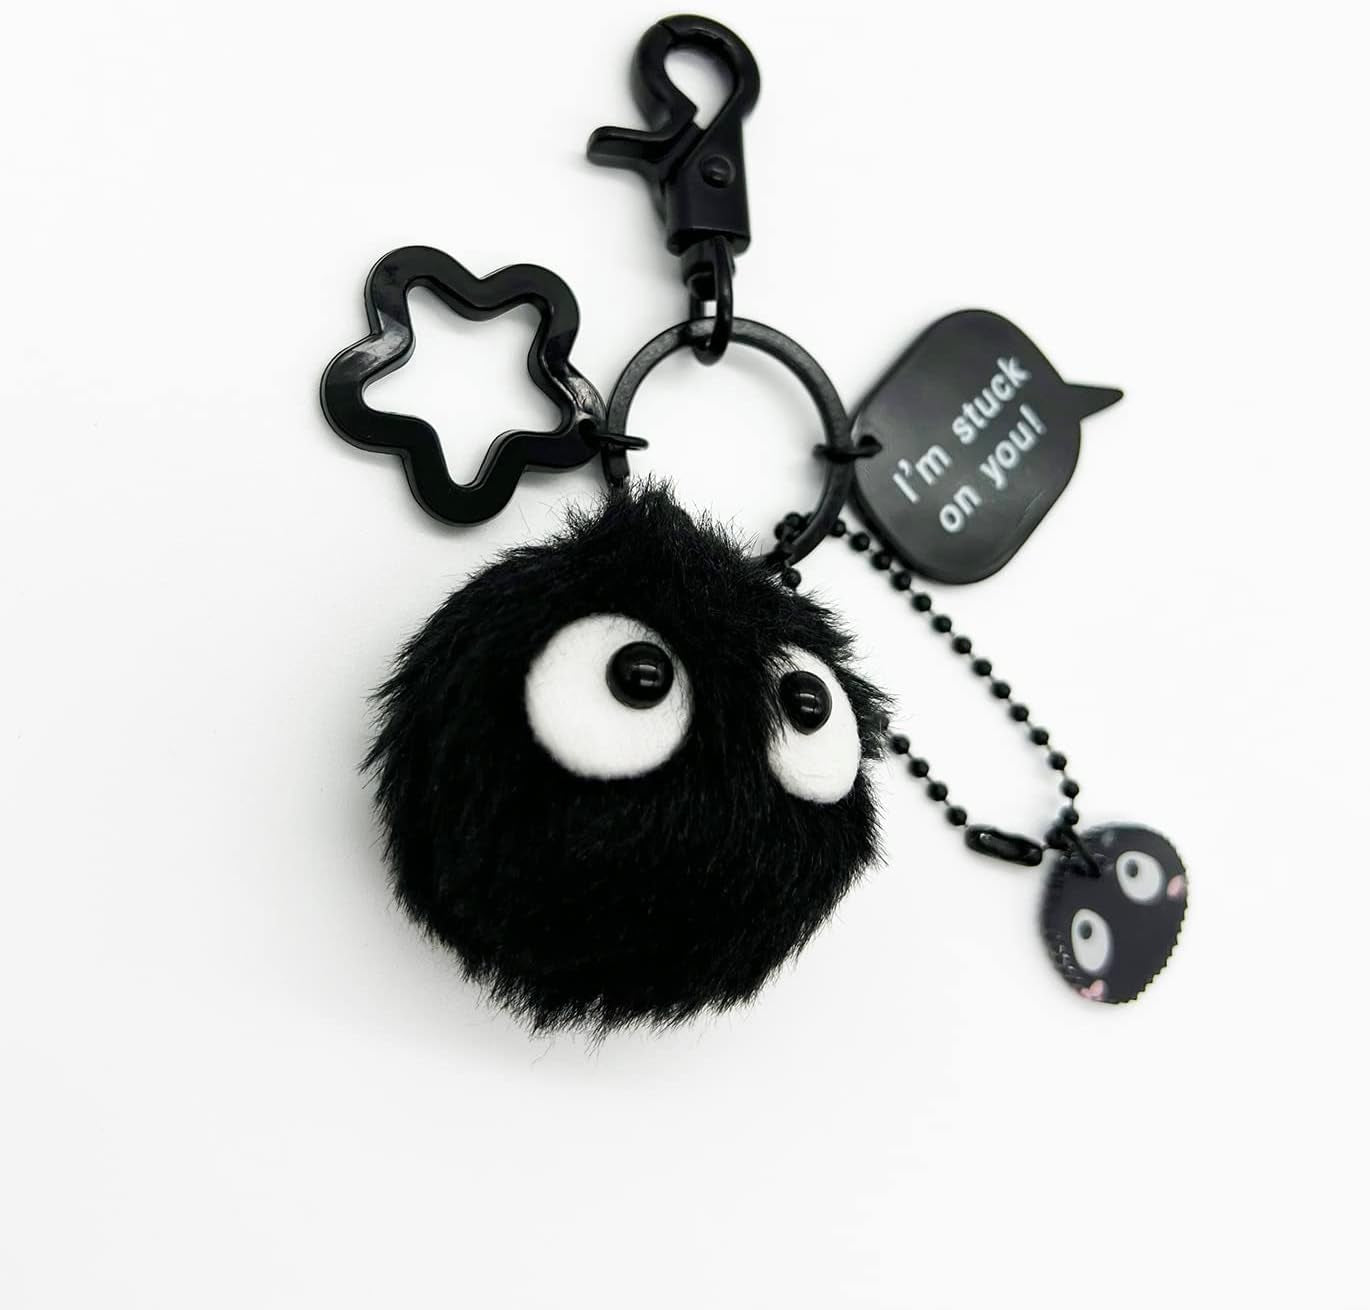 Dust Bunny Soot Sprite Plush Keychain (Style A) - Style a Adorable 2-Inch Plush Dust Bunny Keychain - A Soft and Stylish Accessory for Your Everyday Essentials"